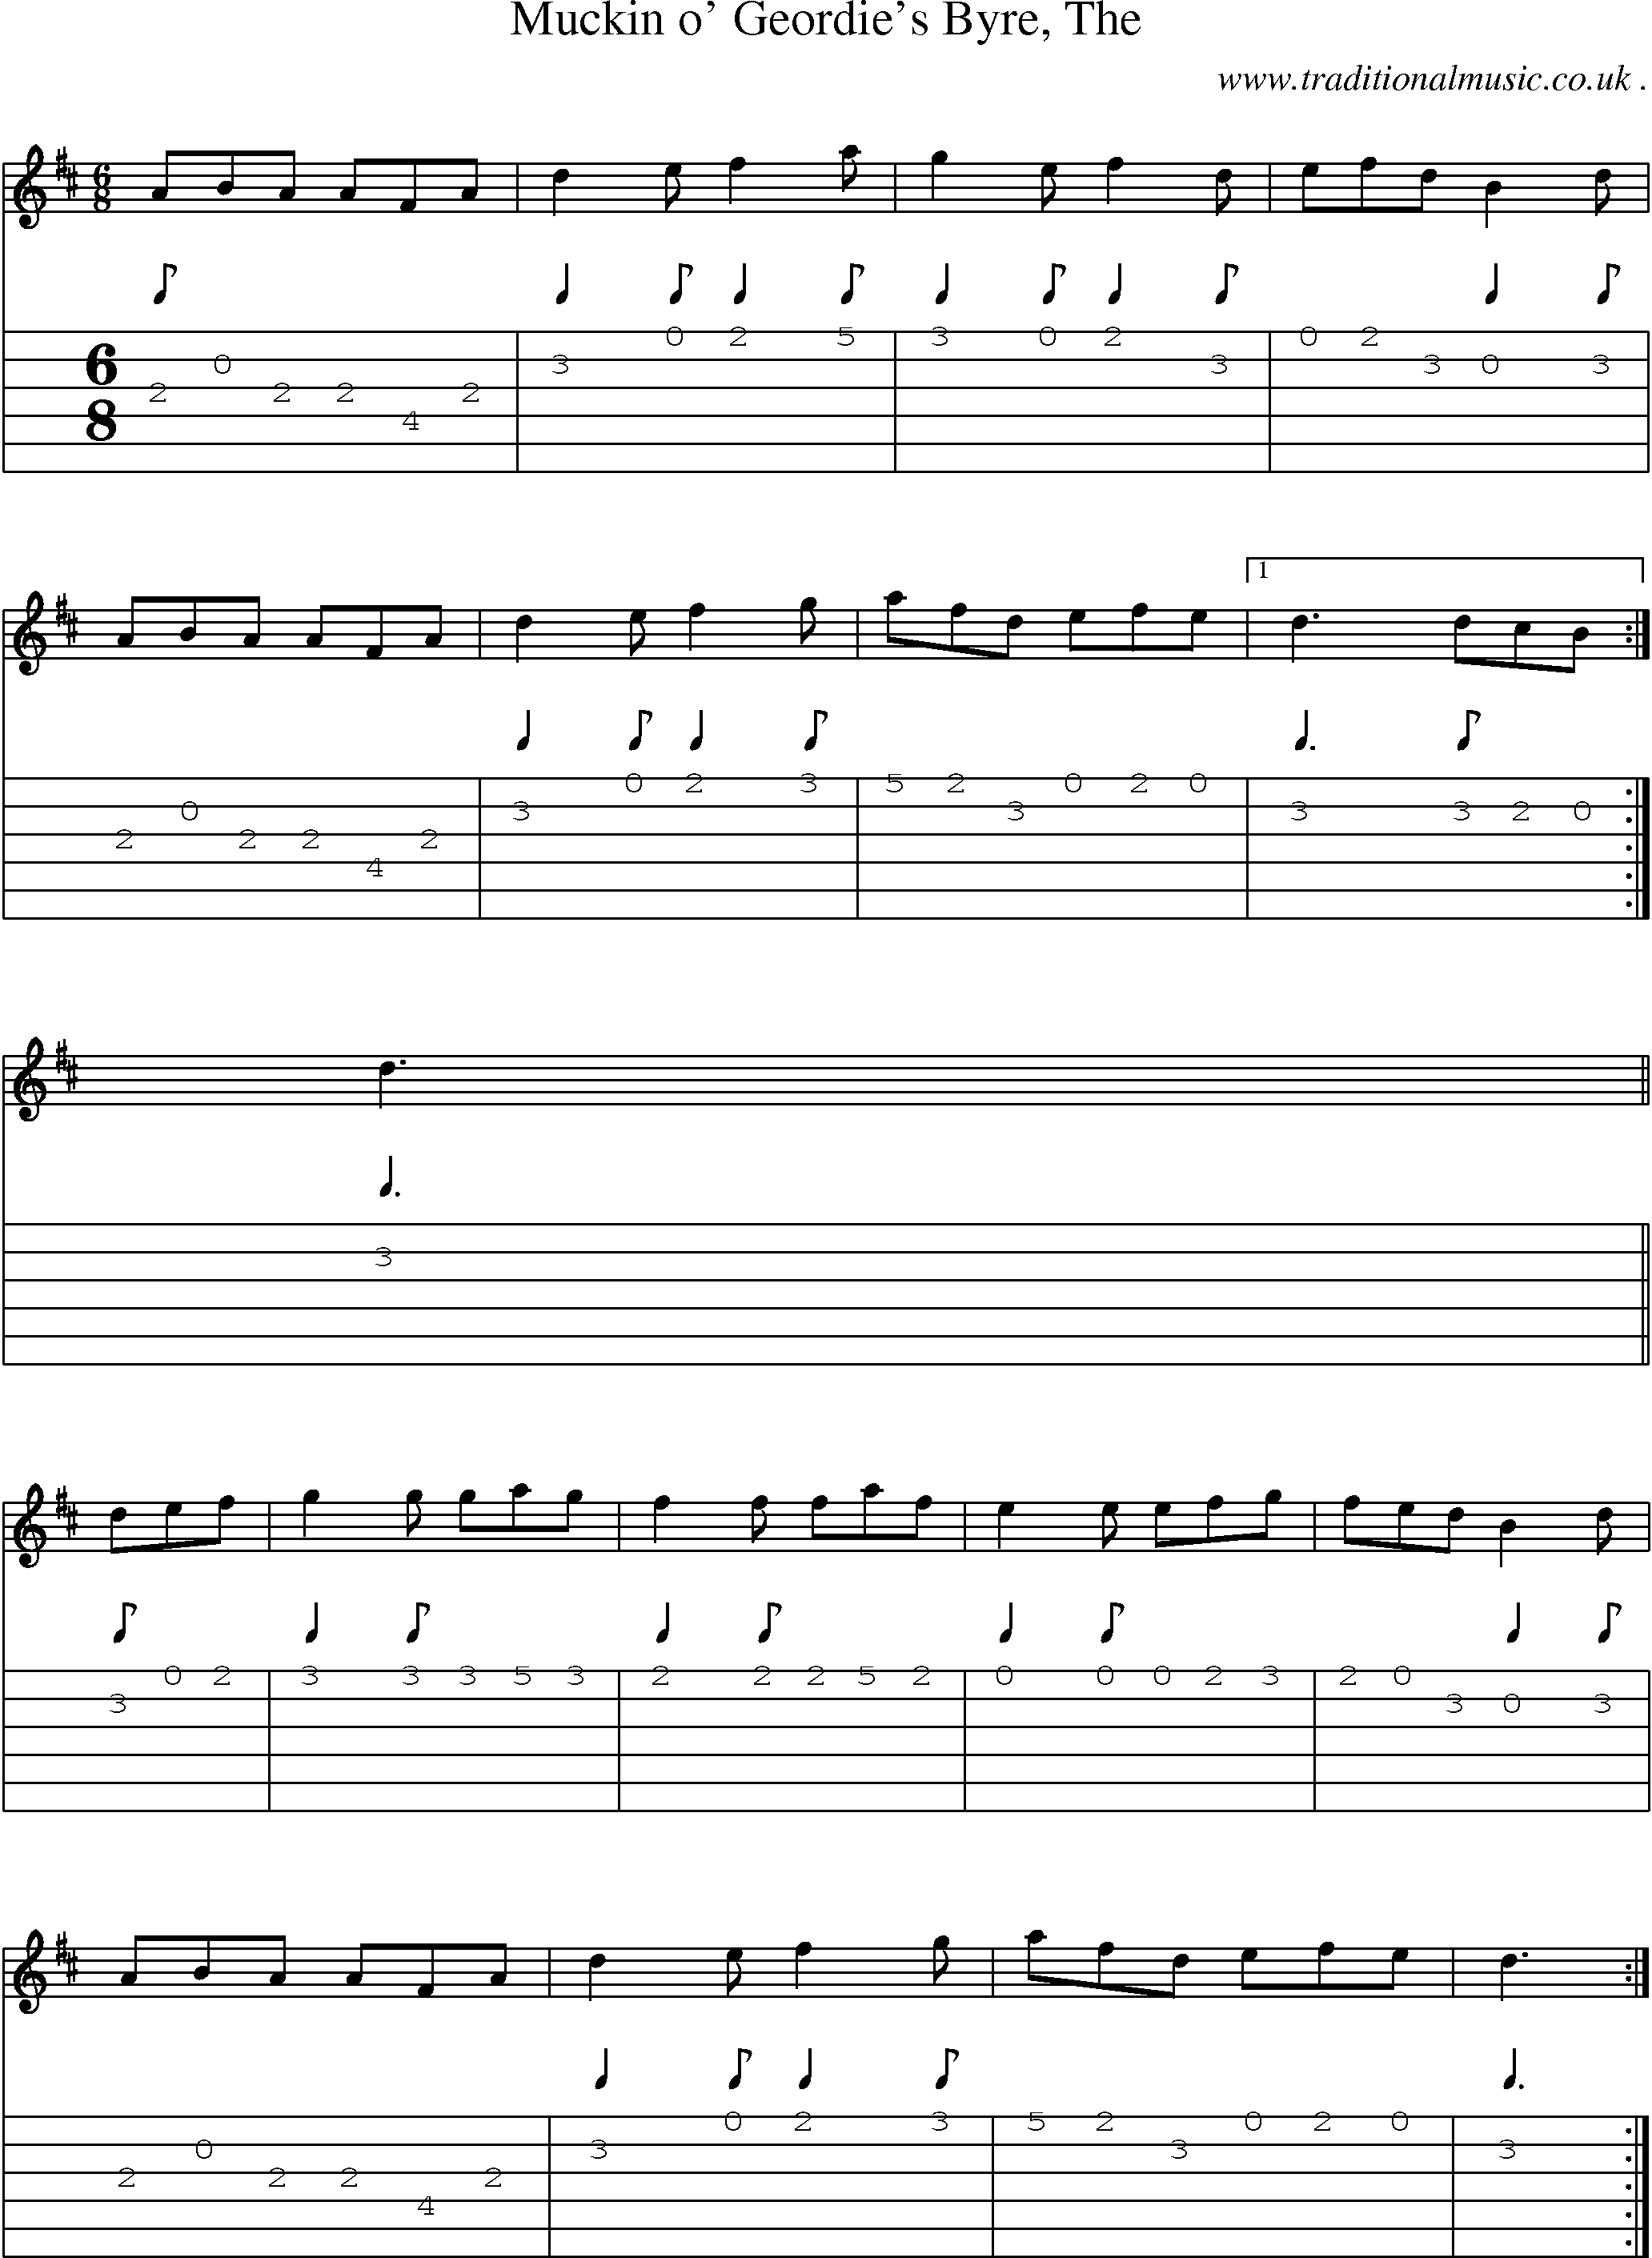 Sheet-music  score, Chords and Guitar Tabs for Muckin O Geordies Byre The